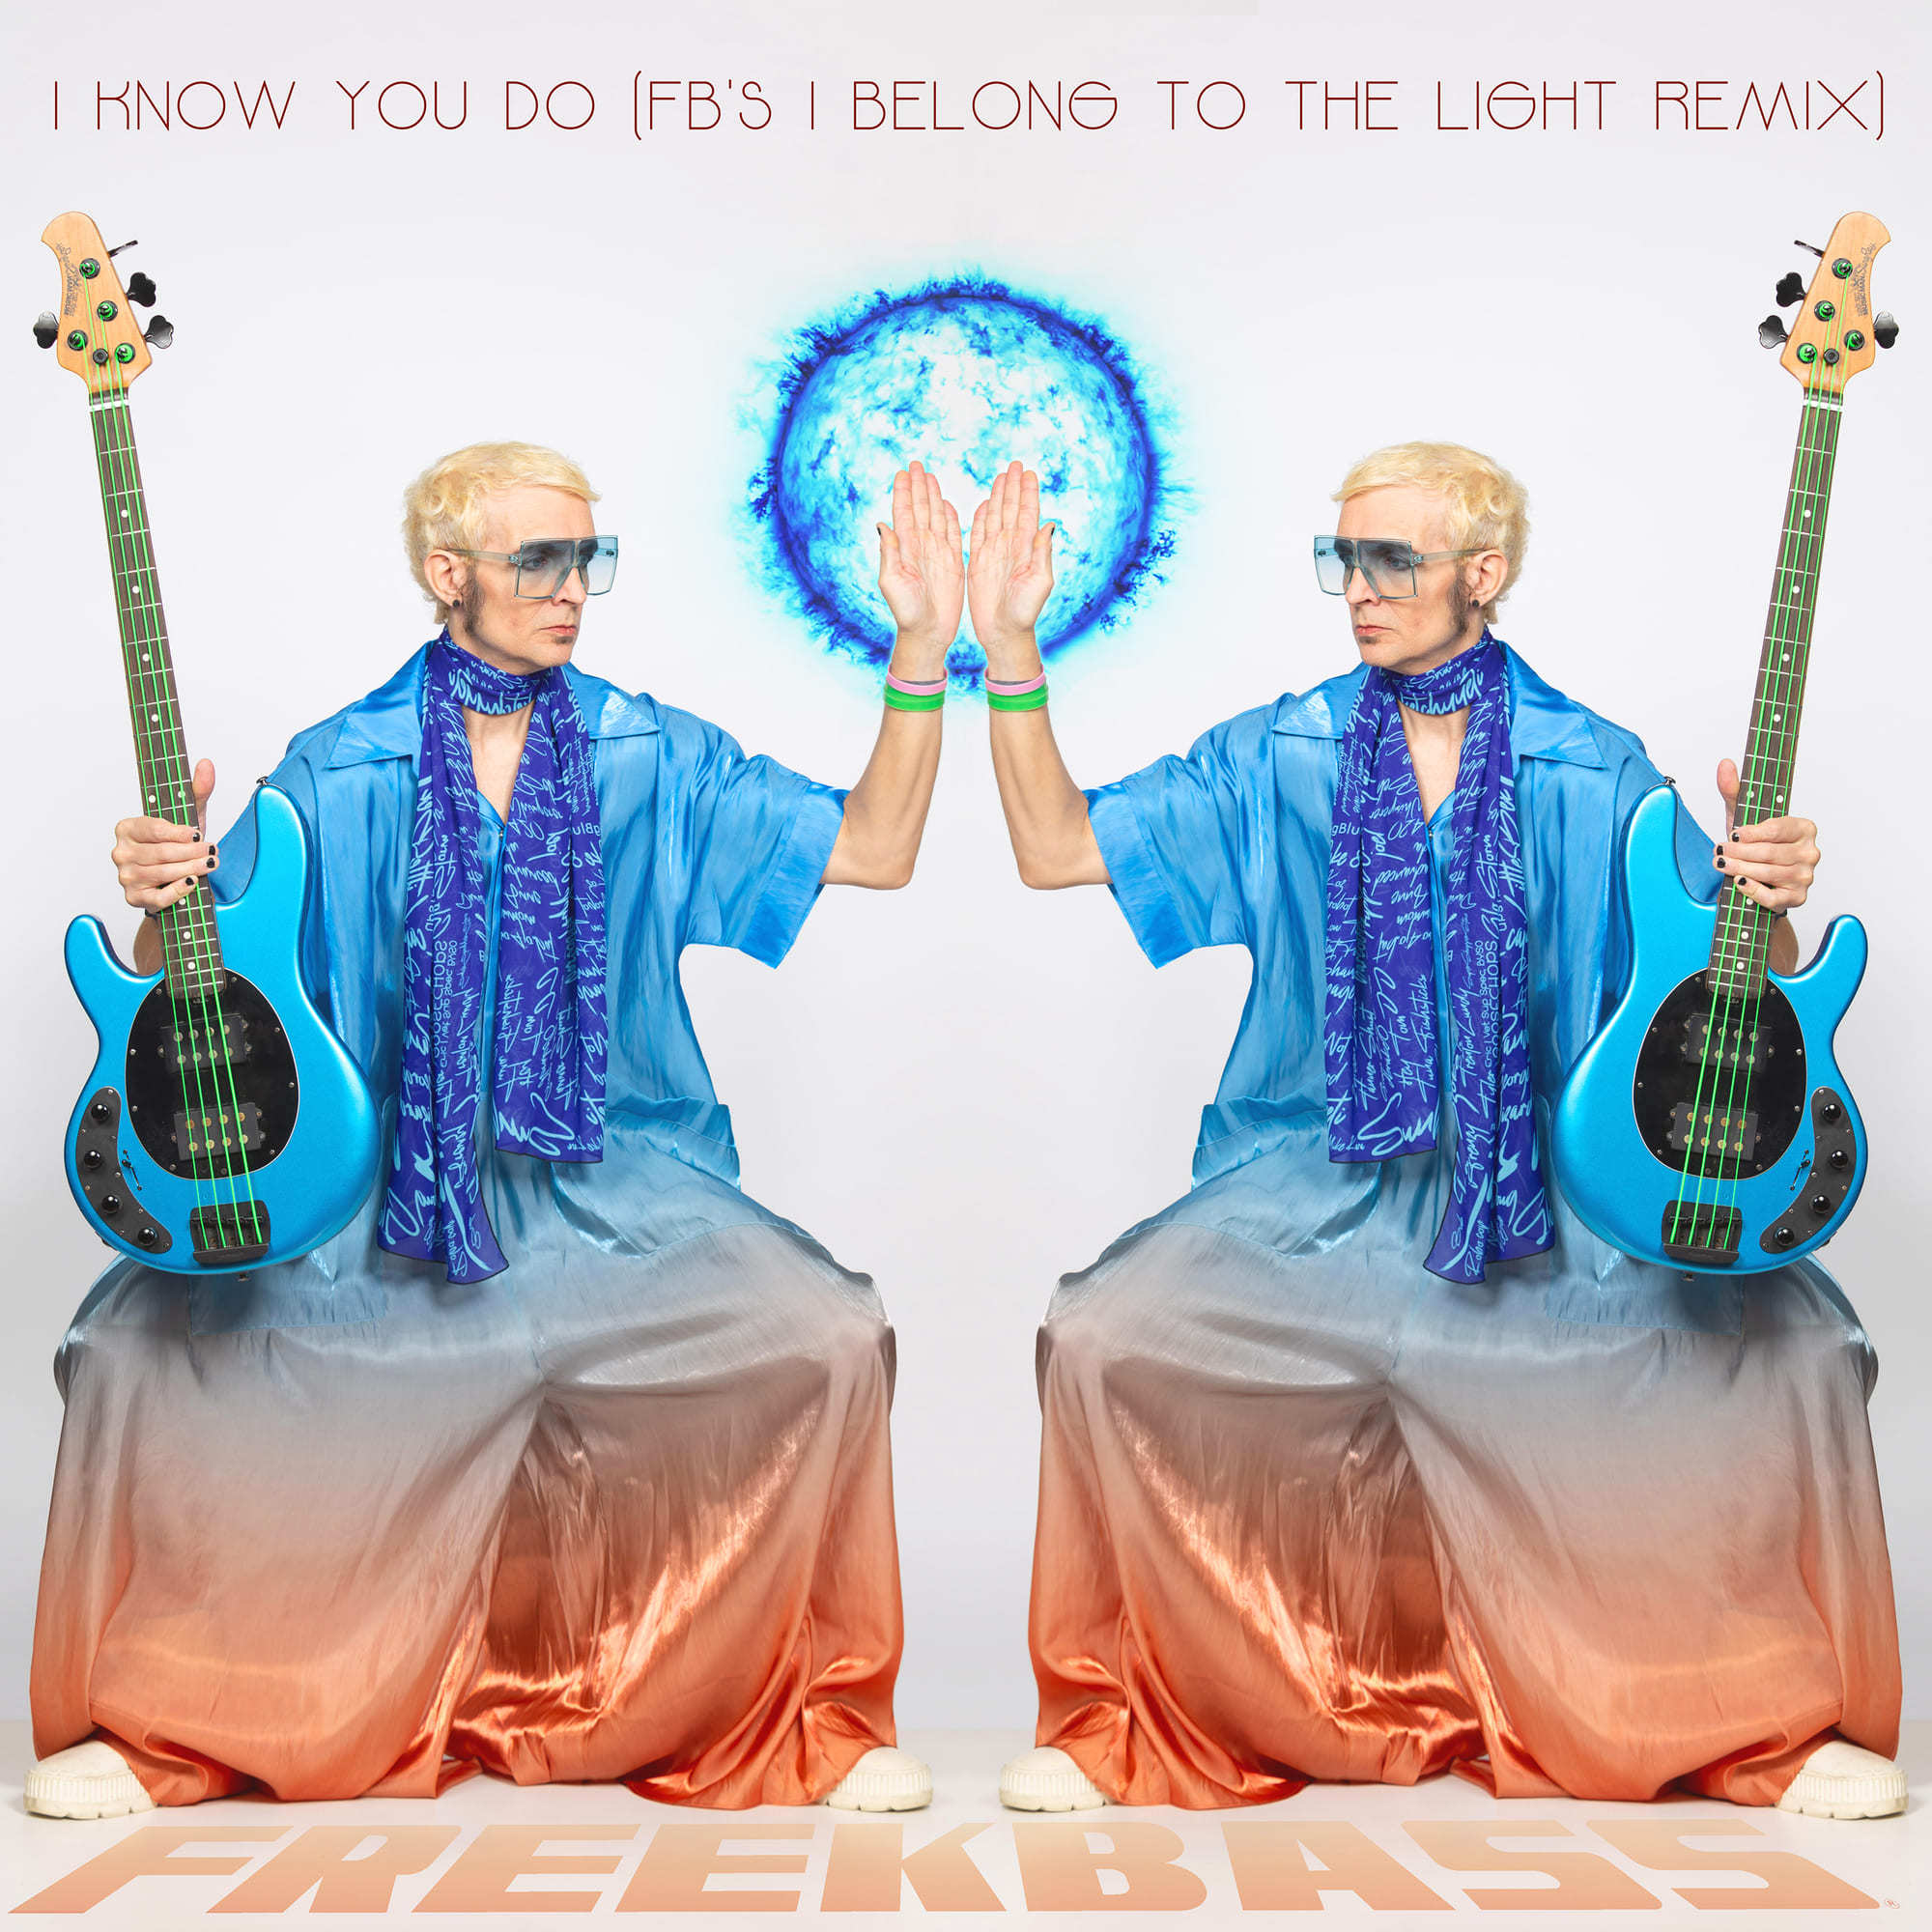 Freekbass Delivers Infectious Funk/Disco Vibes with 'I Belong To The Light' Remix